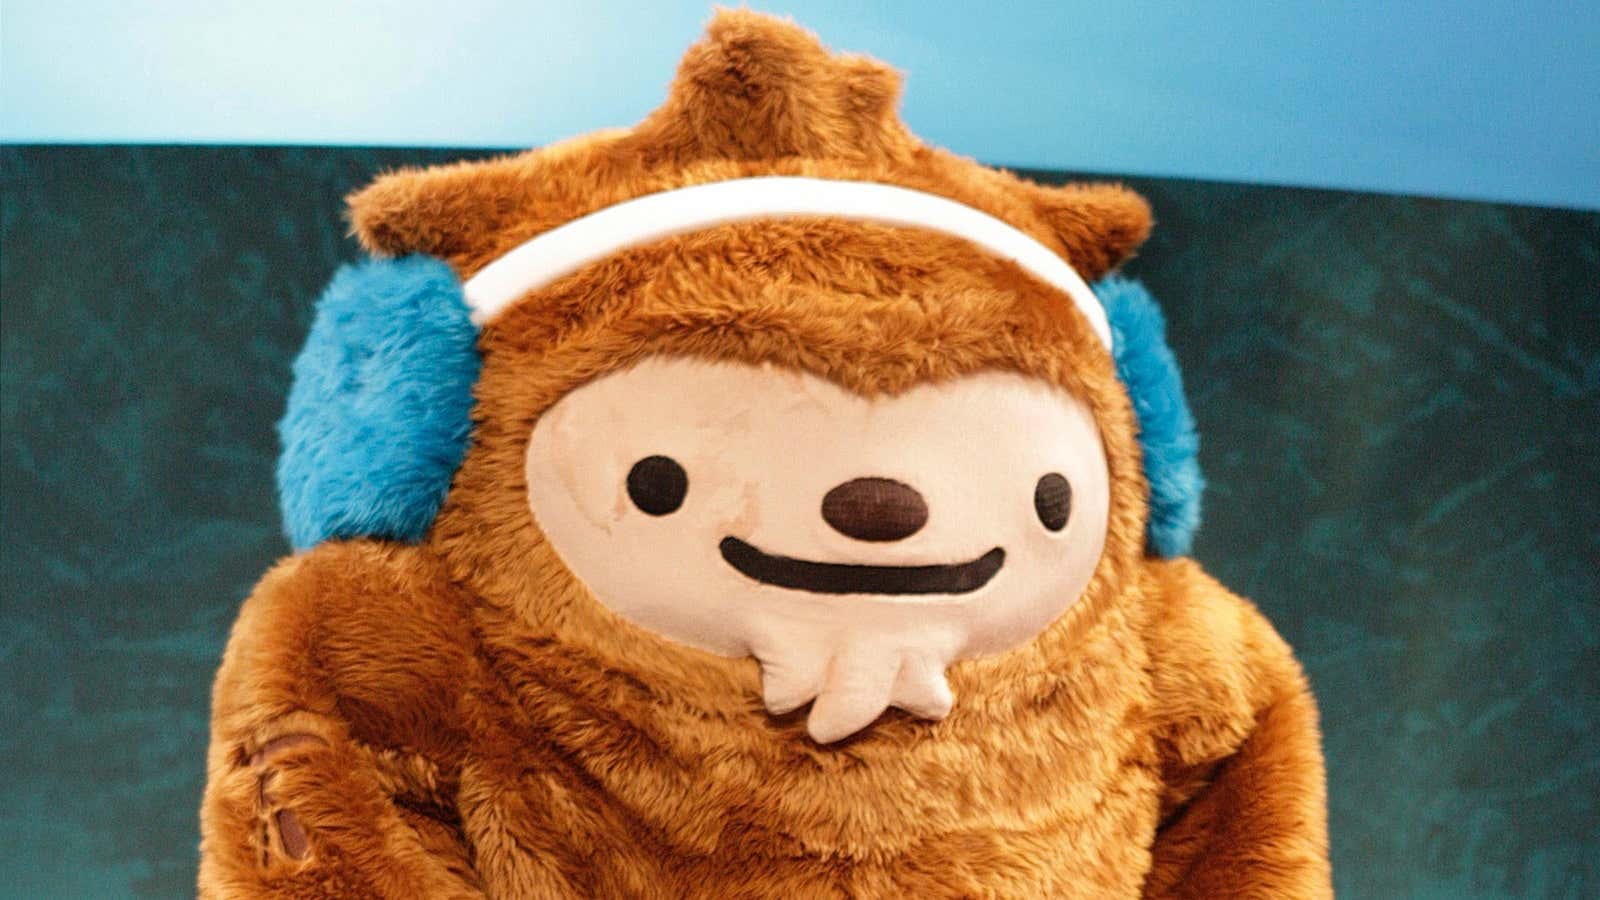 Quatchi, one of the Vancouver 2010 Olympic mascots, is based on Aboriginal Sasquatch lore.